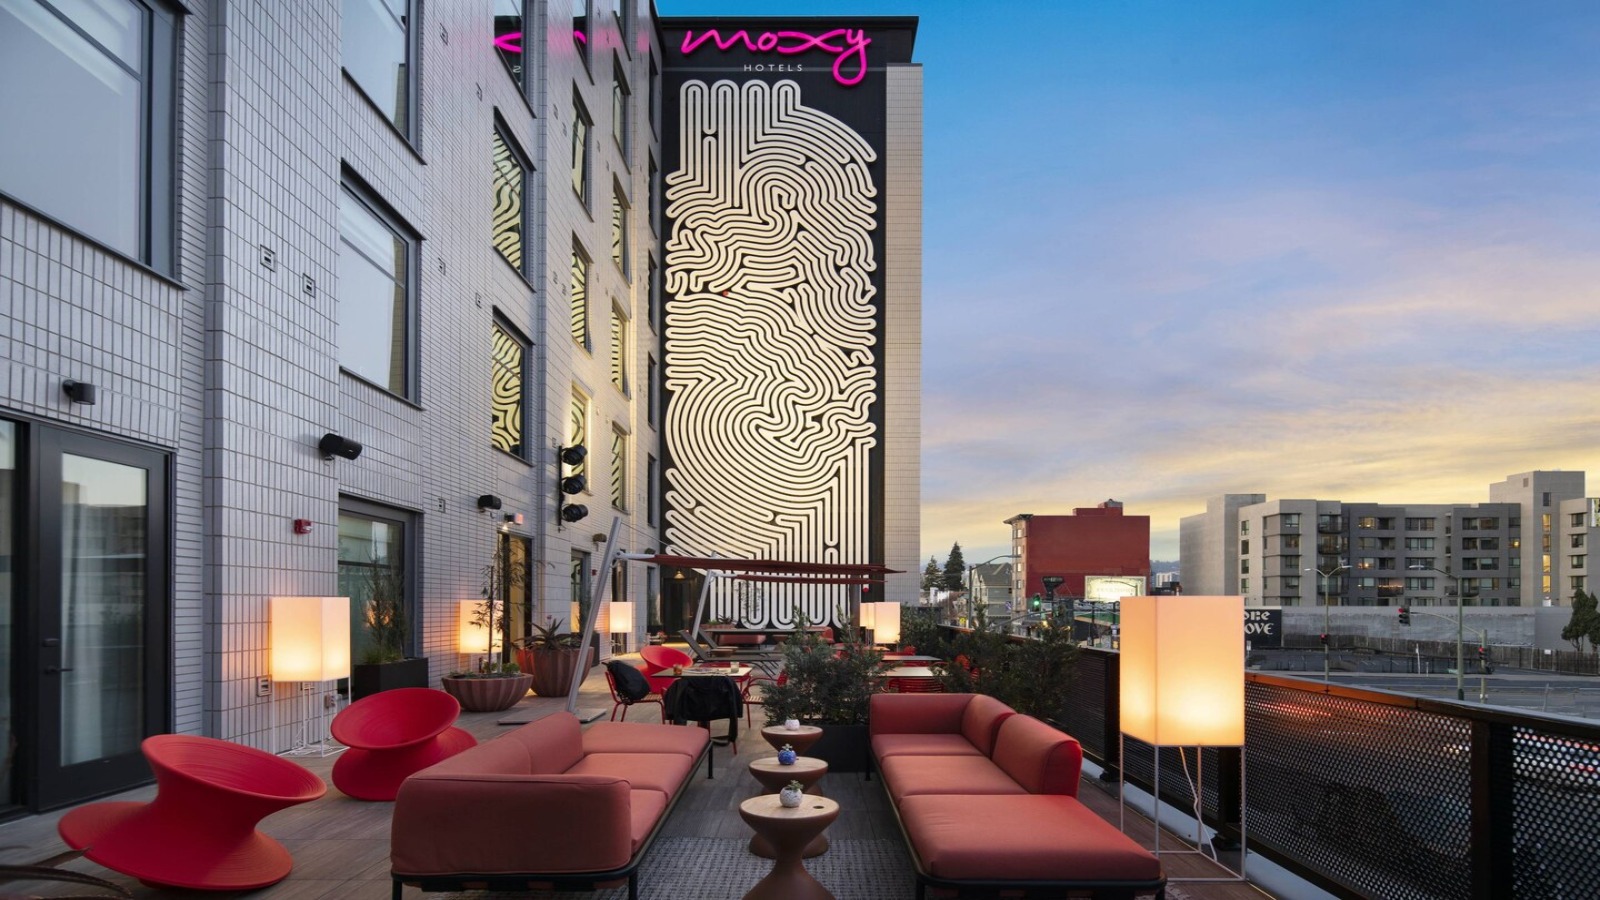 Outdoor roof patio at Moxy Oakland with couches and lamps, a great hip hotel for group travel